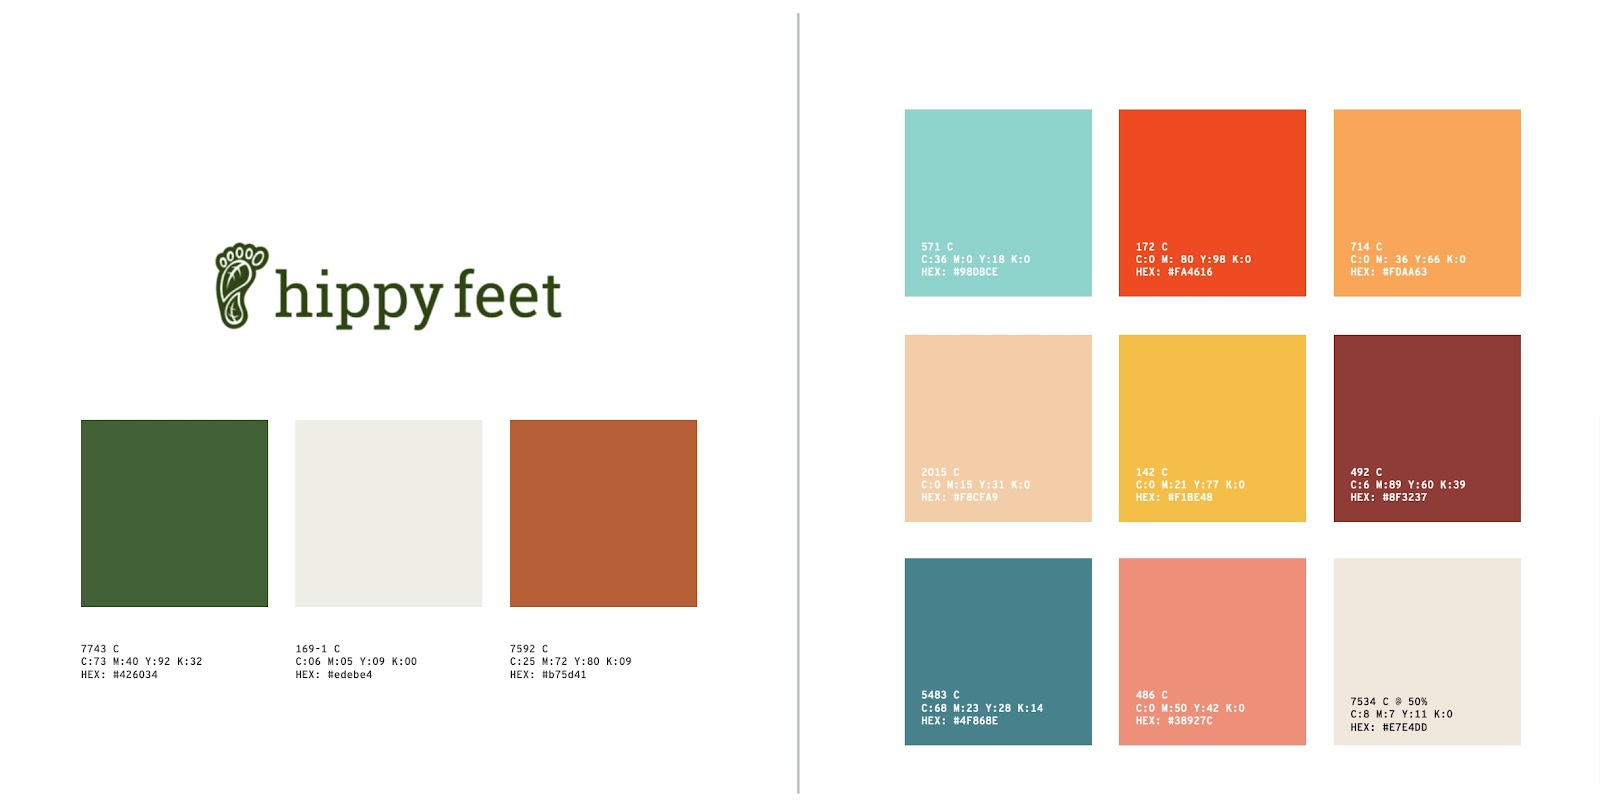 hippy feet style guide color scheme